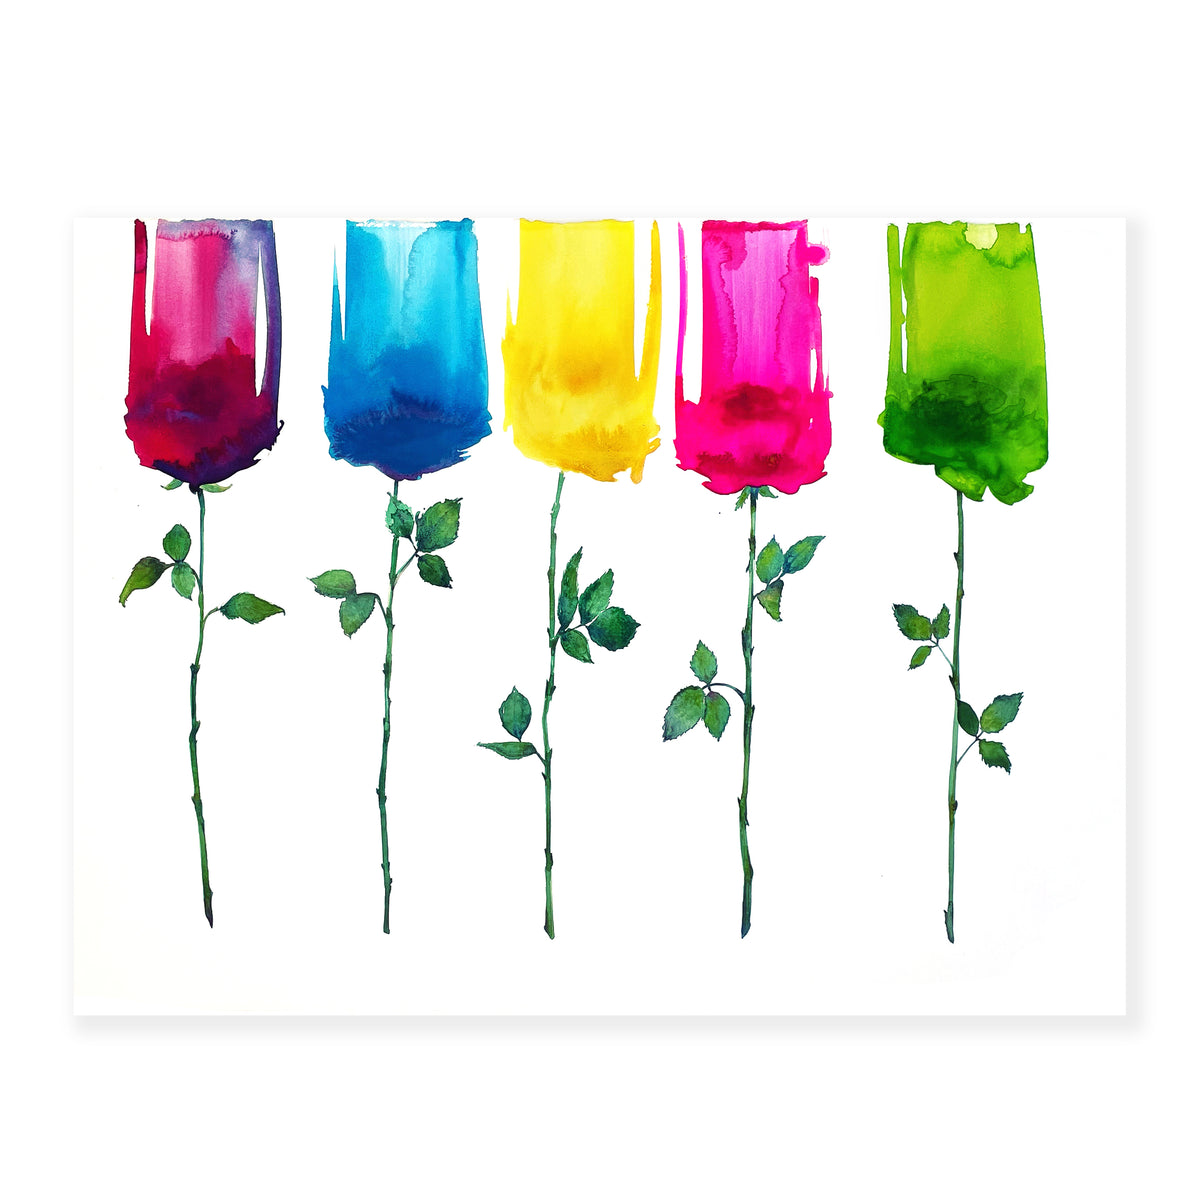 A fine art print illustrating a row of red blue yellow pink and green single stem roses whose petals create a gradient up until the top edge of the paper painted with watercolors on a soft white background